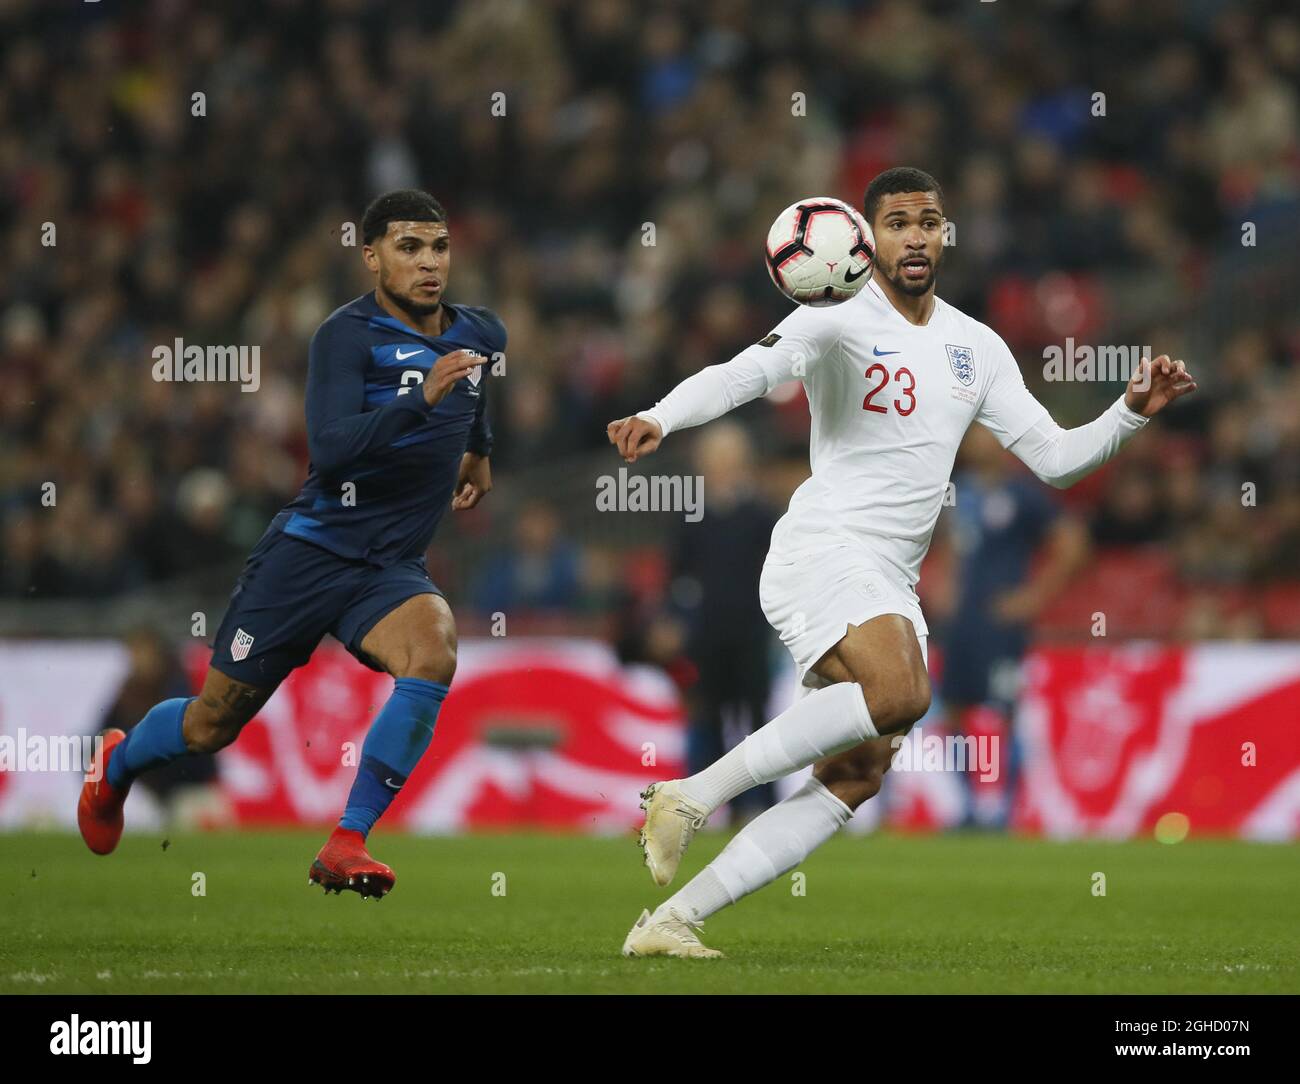 Ruben Loftus-Cheek of England gets clear of DeAndre Yedlin of USA during the Friendly International match at Wembley Stadium, London. Picture date: 15th November 2018. Picture credit should read: David Klein/Sportimage via PA Images Stock Photo